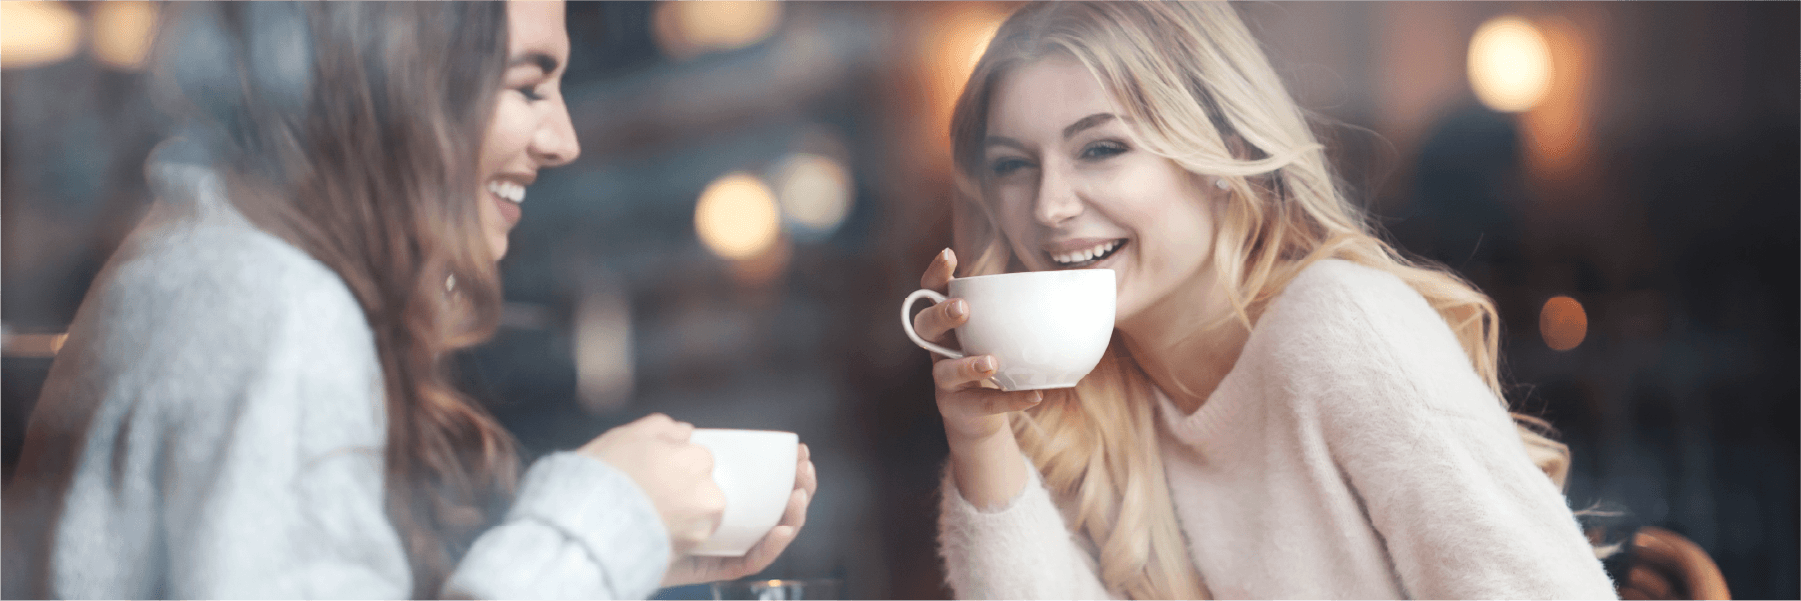 2 woman enjoying a hot drink together